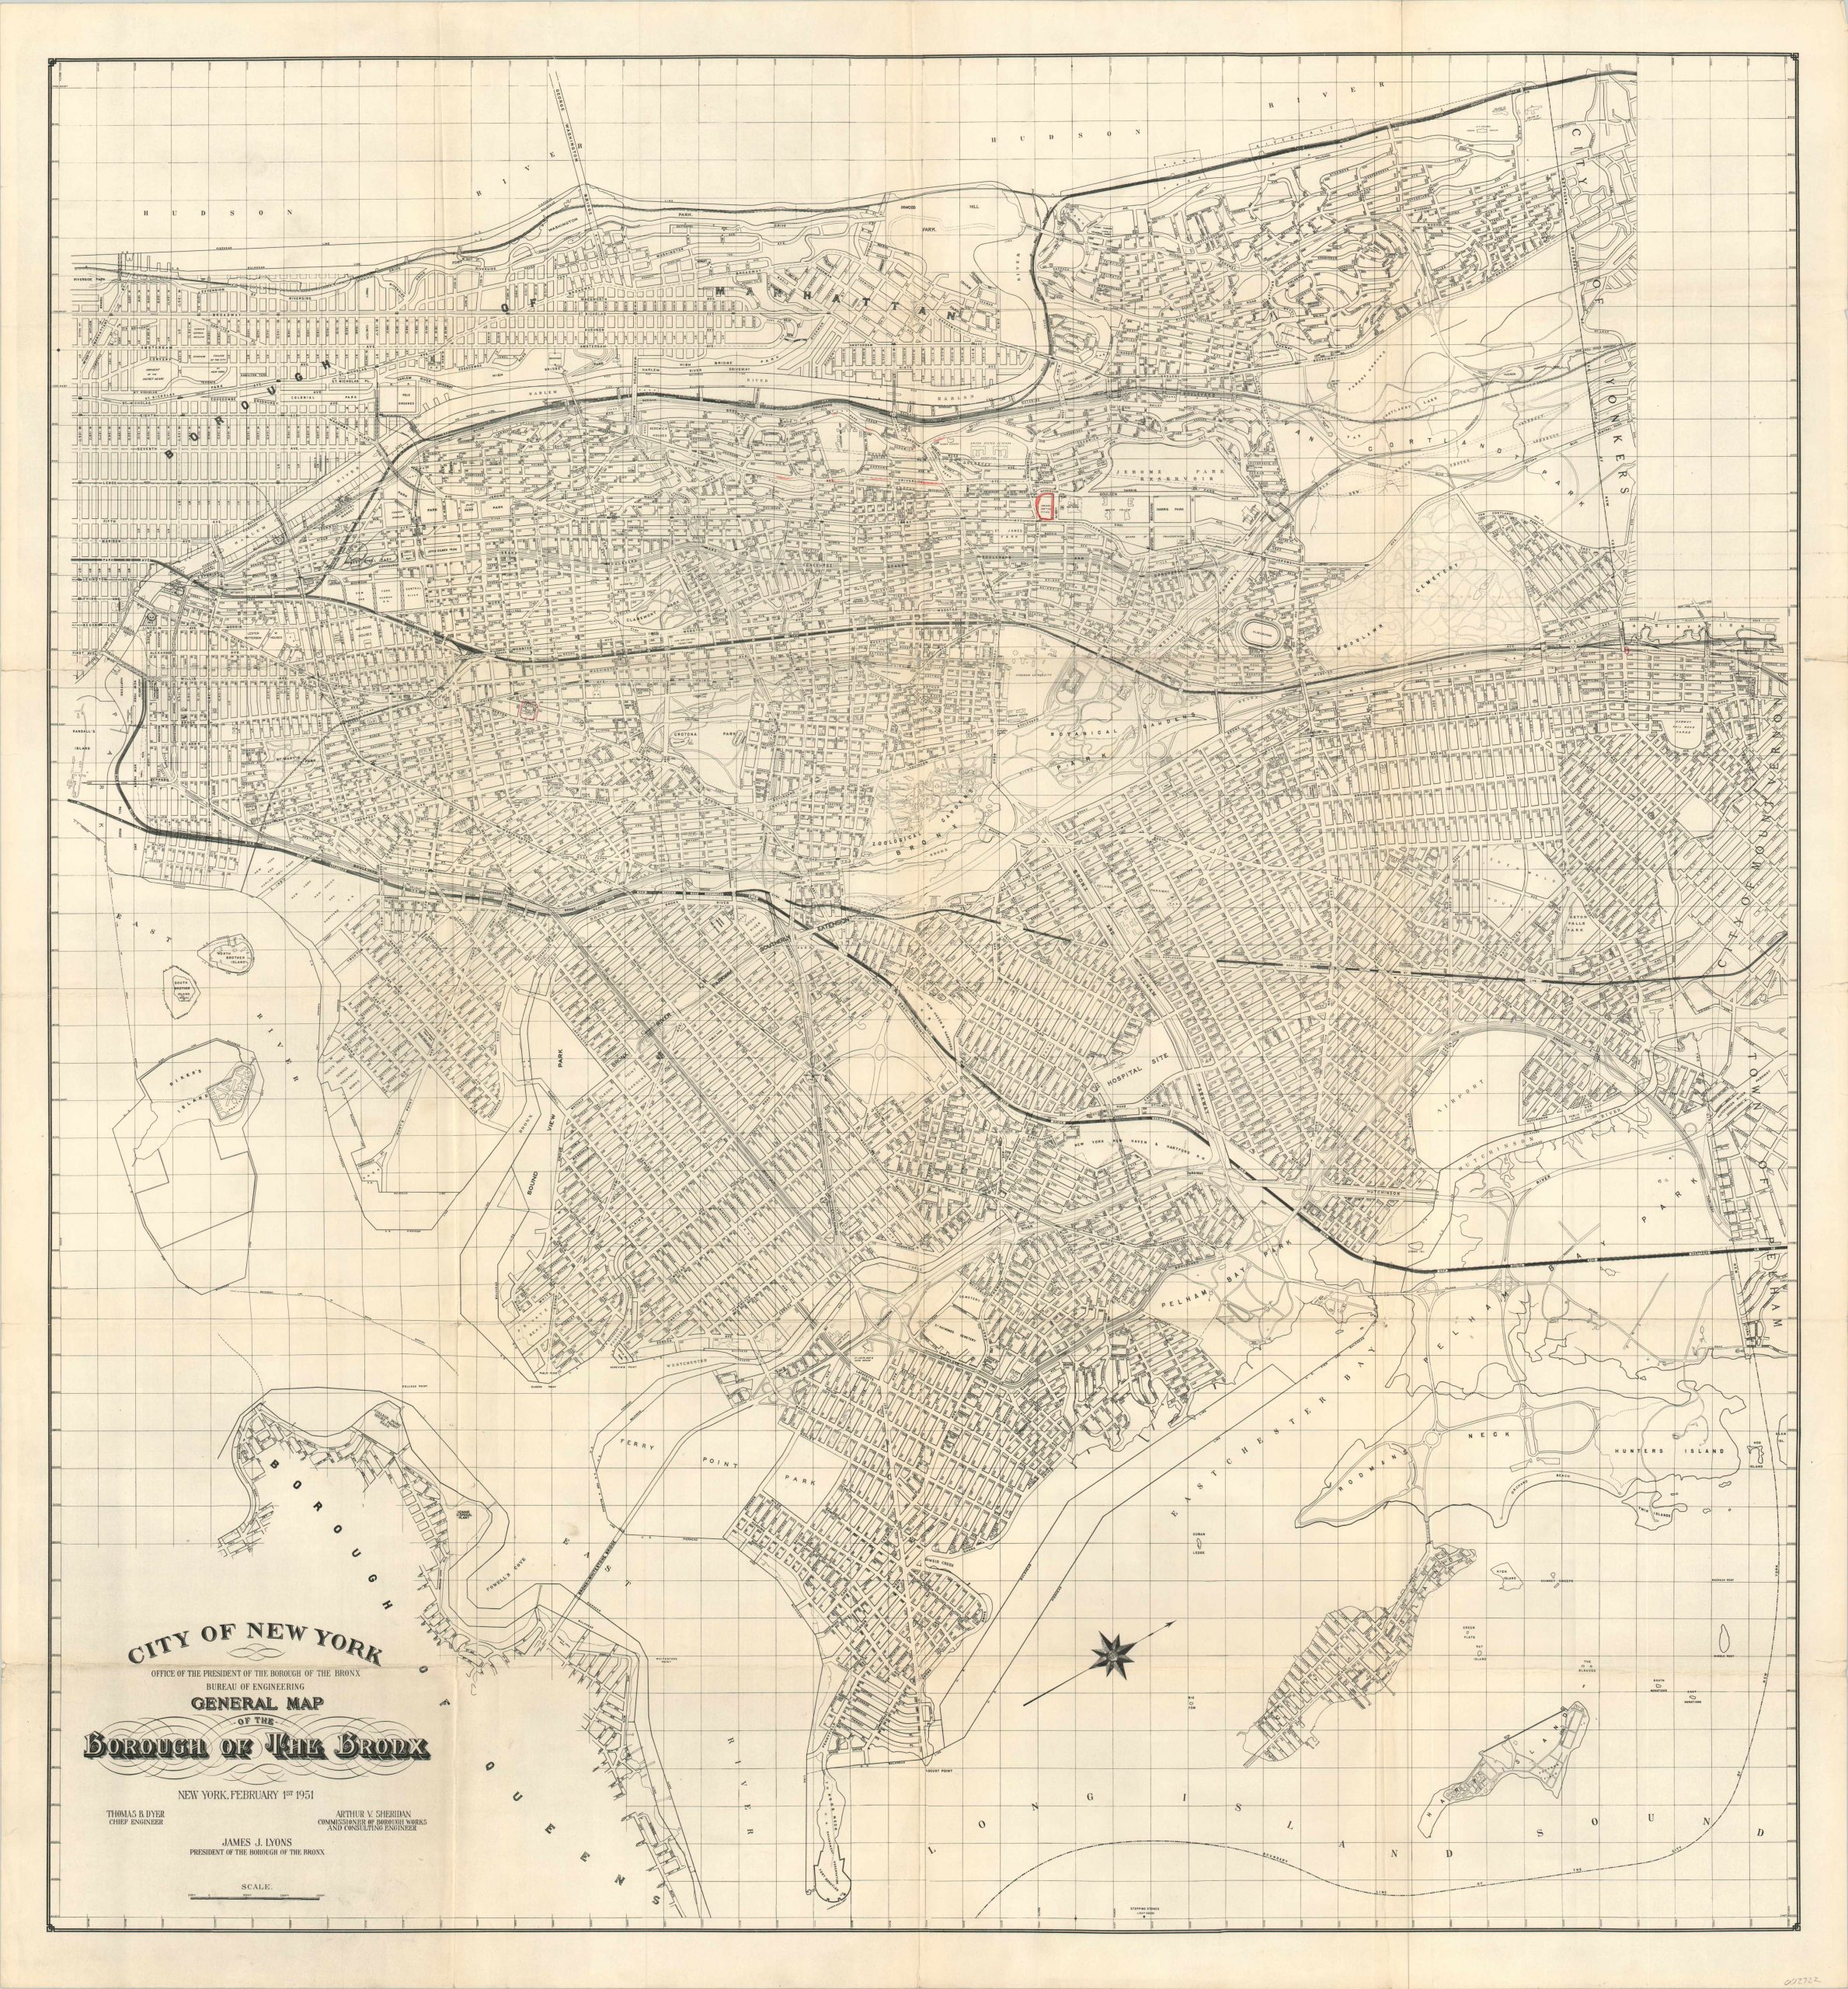 General Map of the Borough of The Bronx – Curtis Wright Maps